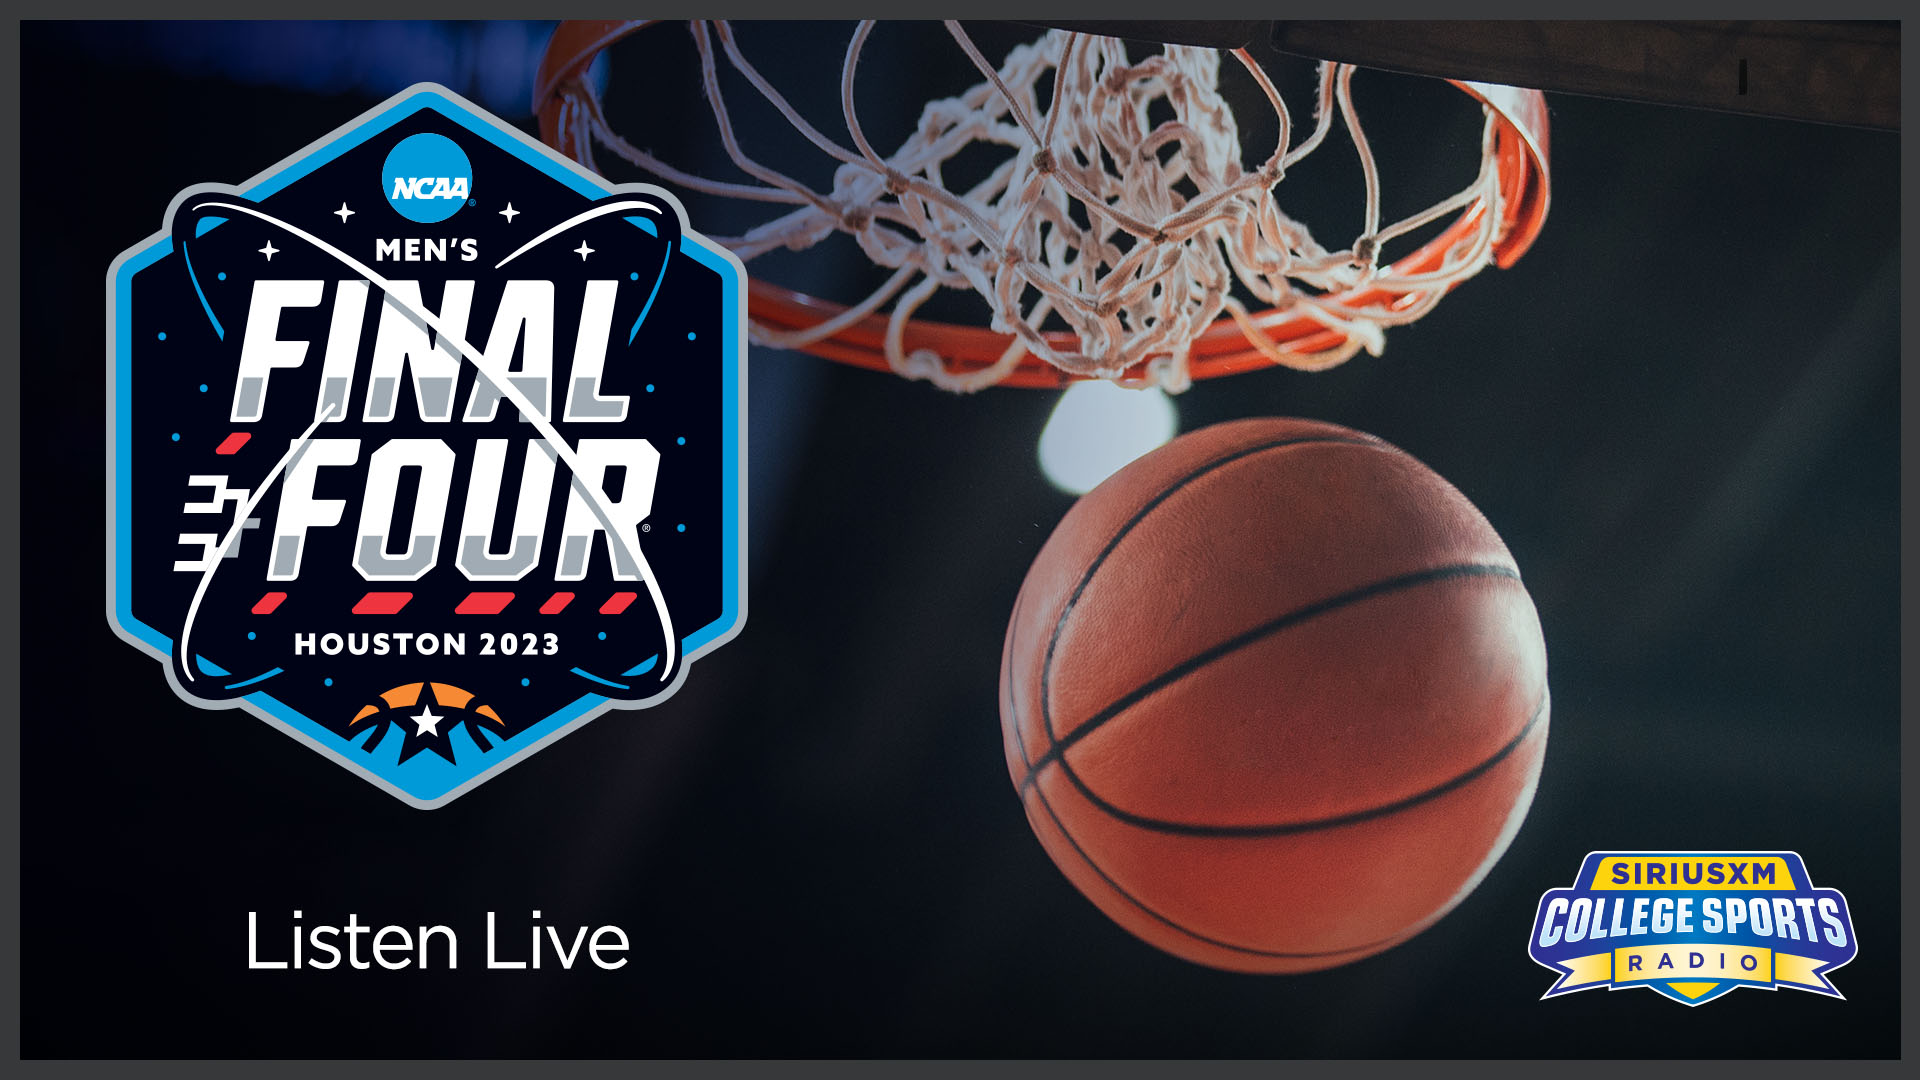 March Madness Final Four Games on SiriusXM College Sports Radio